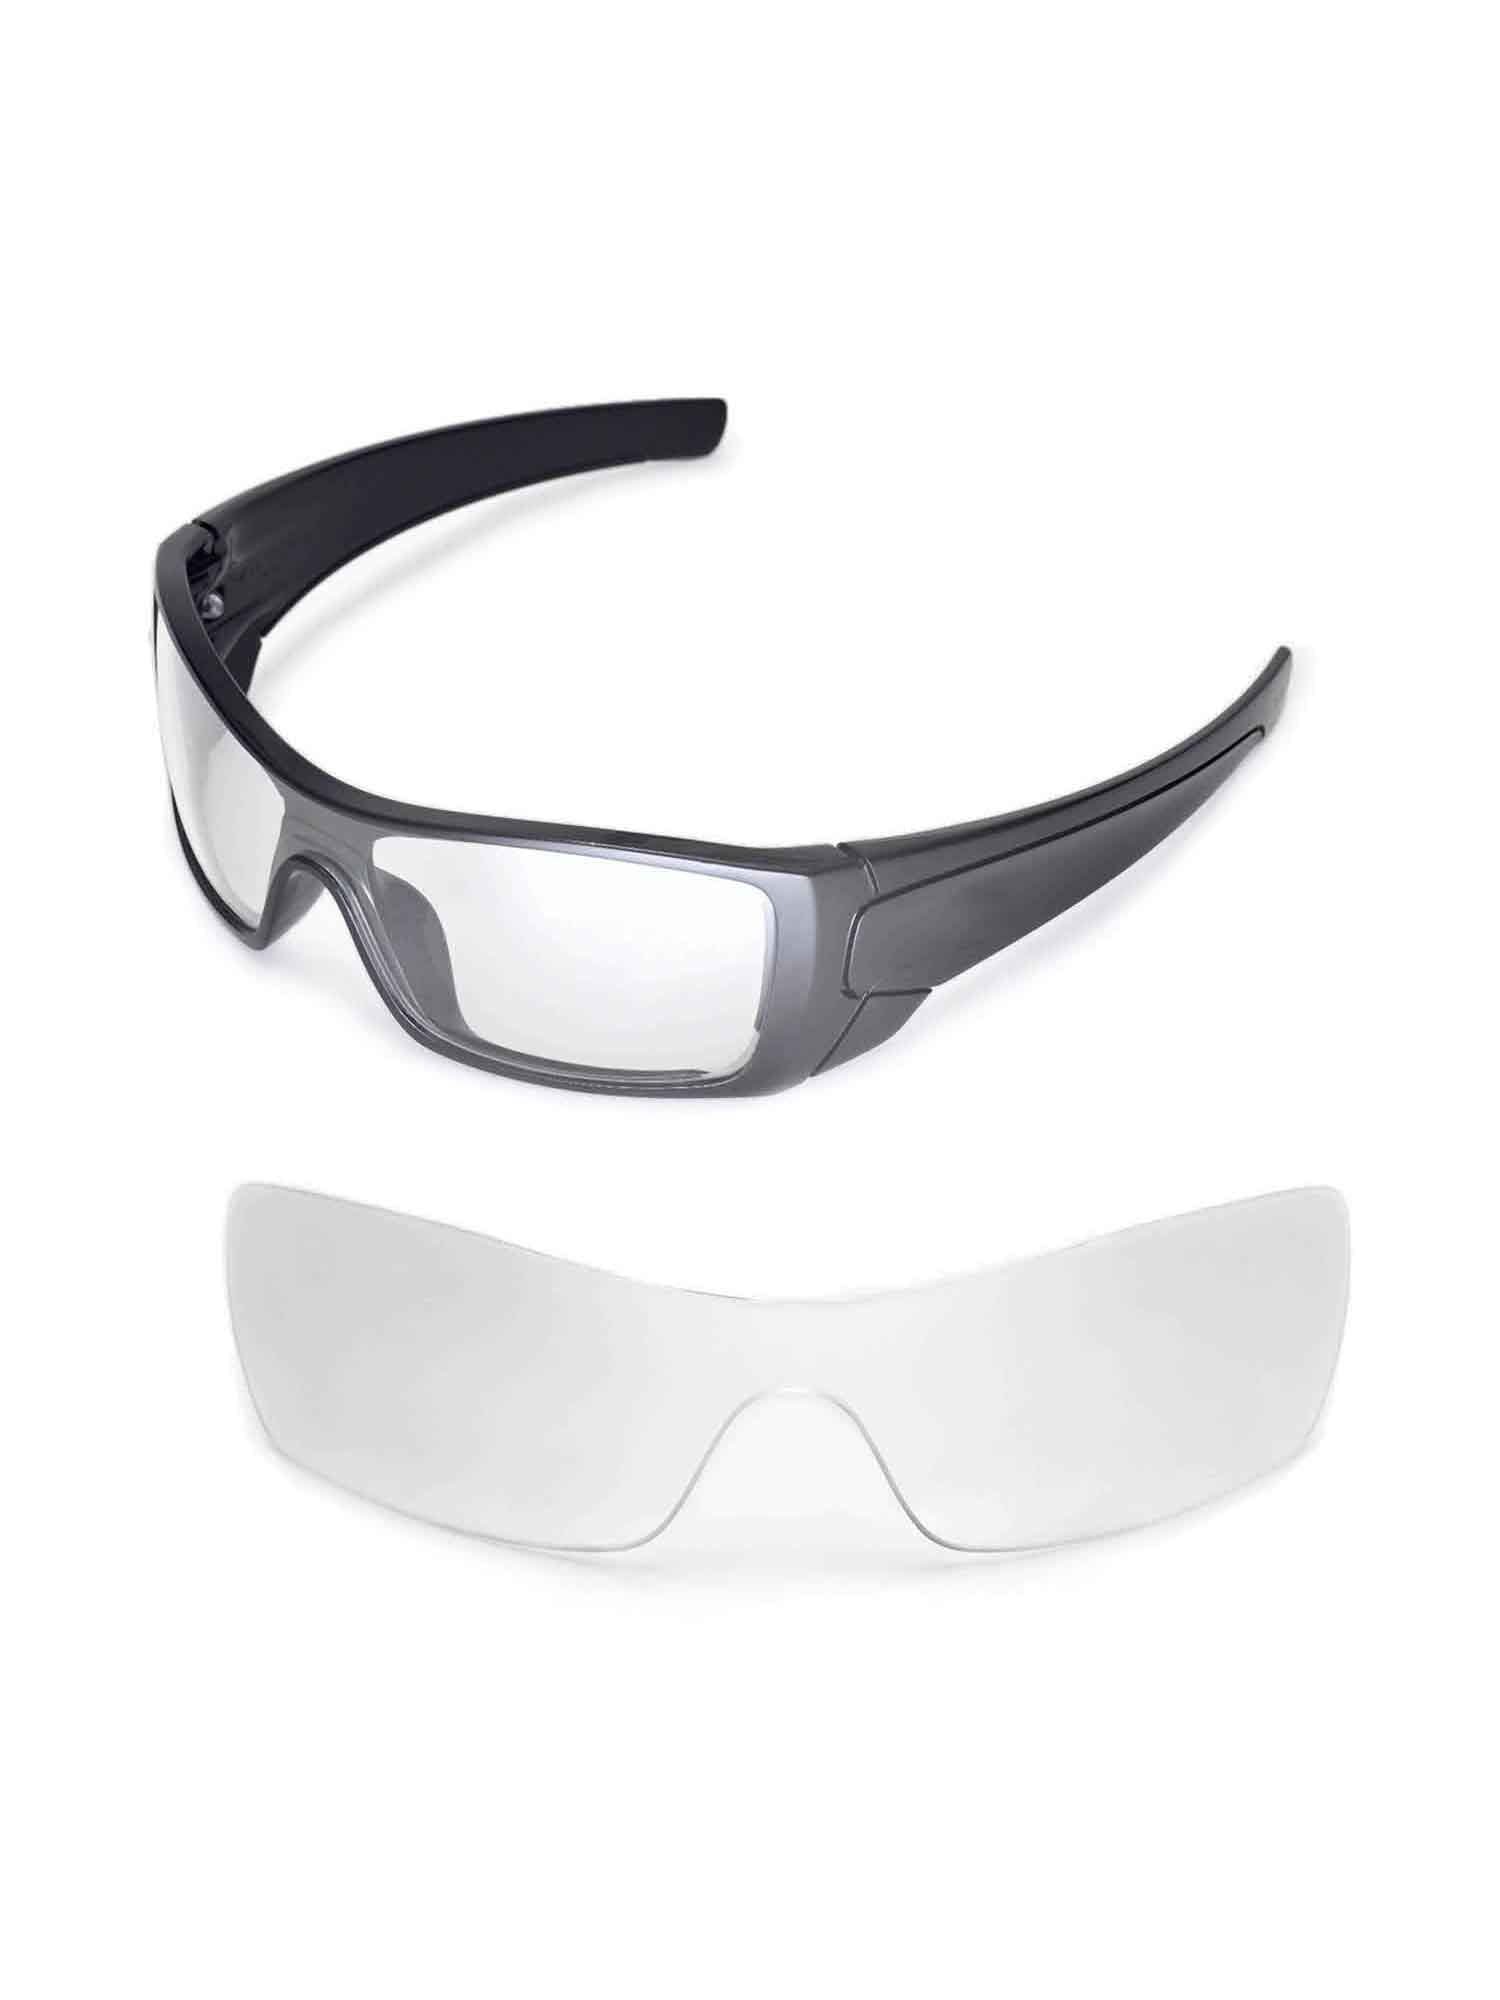 replacement lenses for oakley batwolf